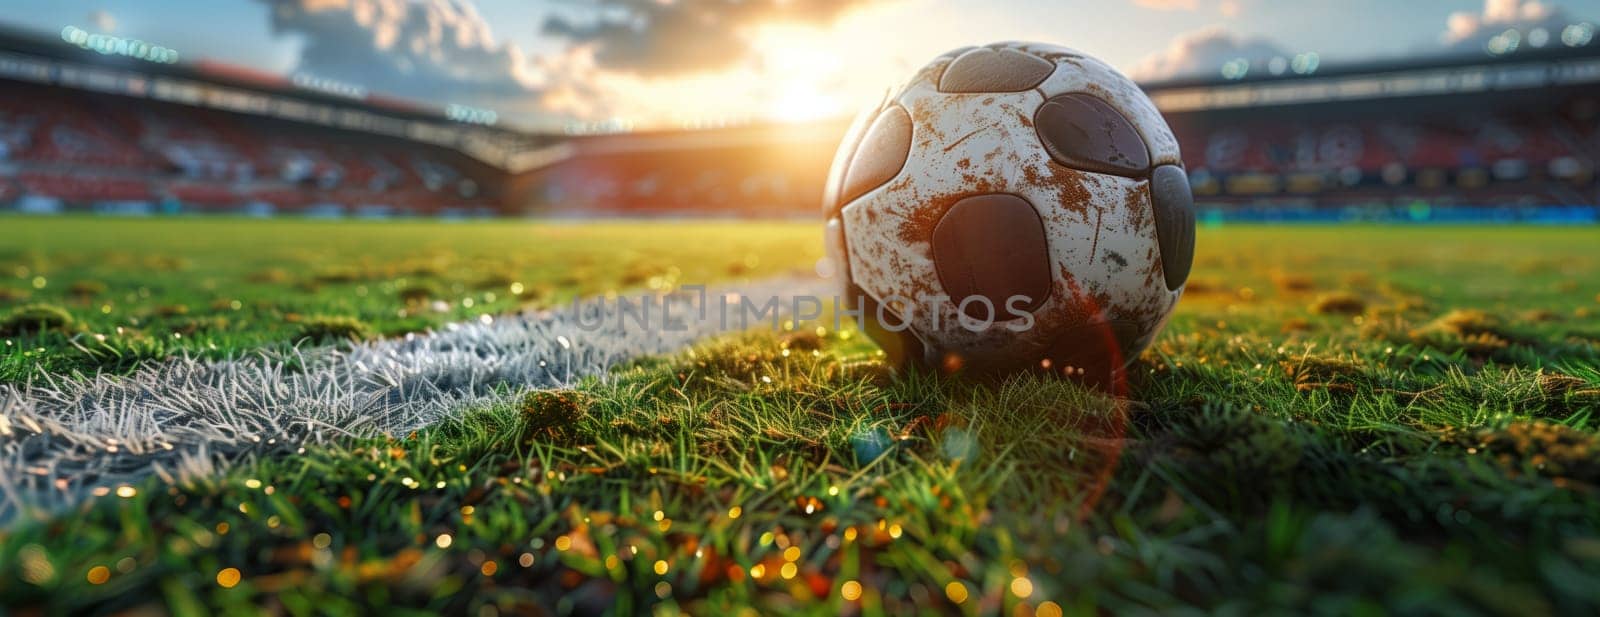 A soccer ball rests peacefully on the lush green grass of a soccer field, blending beautifully with the natural landscape and surroundings